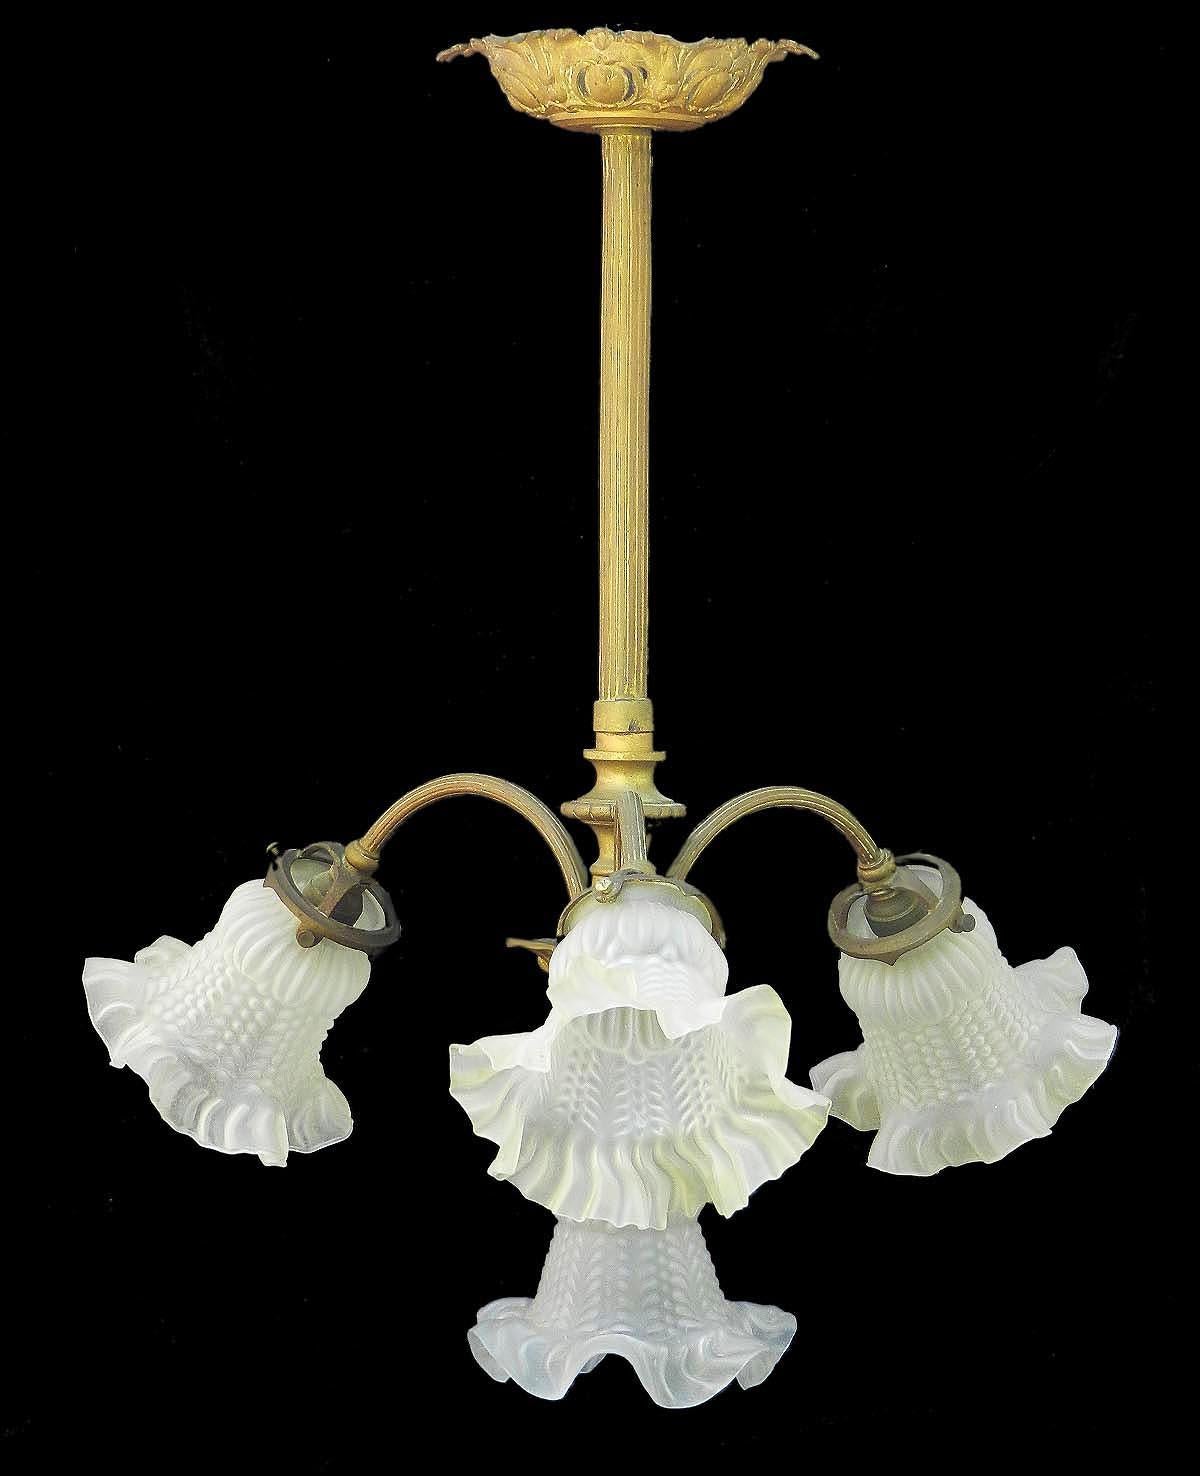 French chandelier, circa 1900, Belle Époque
Four branch
Ornate gilt bronze light, three stems with glass frilled tulip shades surrounding a central tulip shade
In good original condition with no losses to the glass 
Good age patina to the